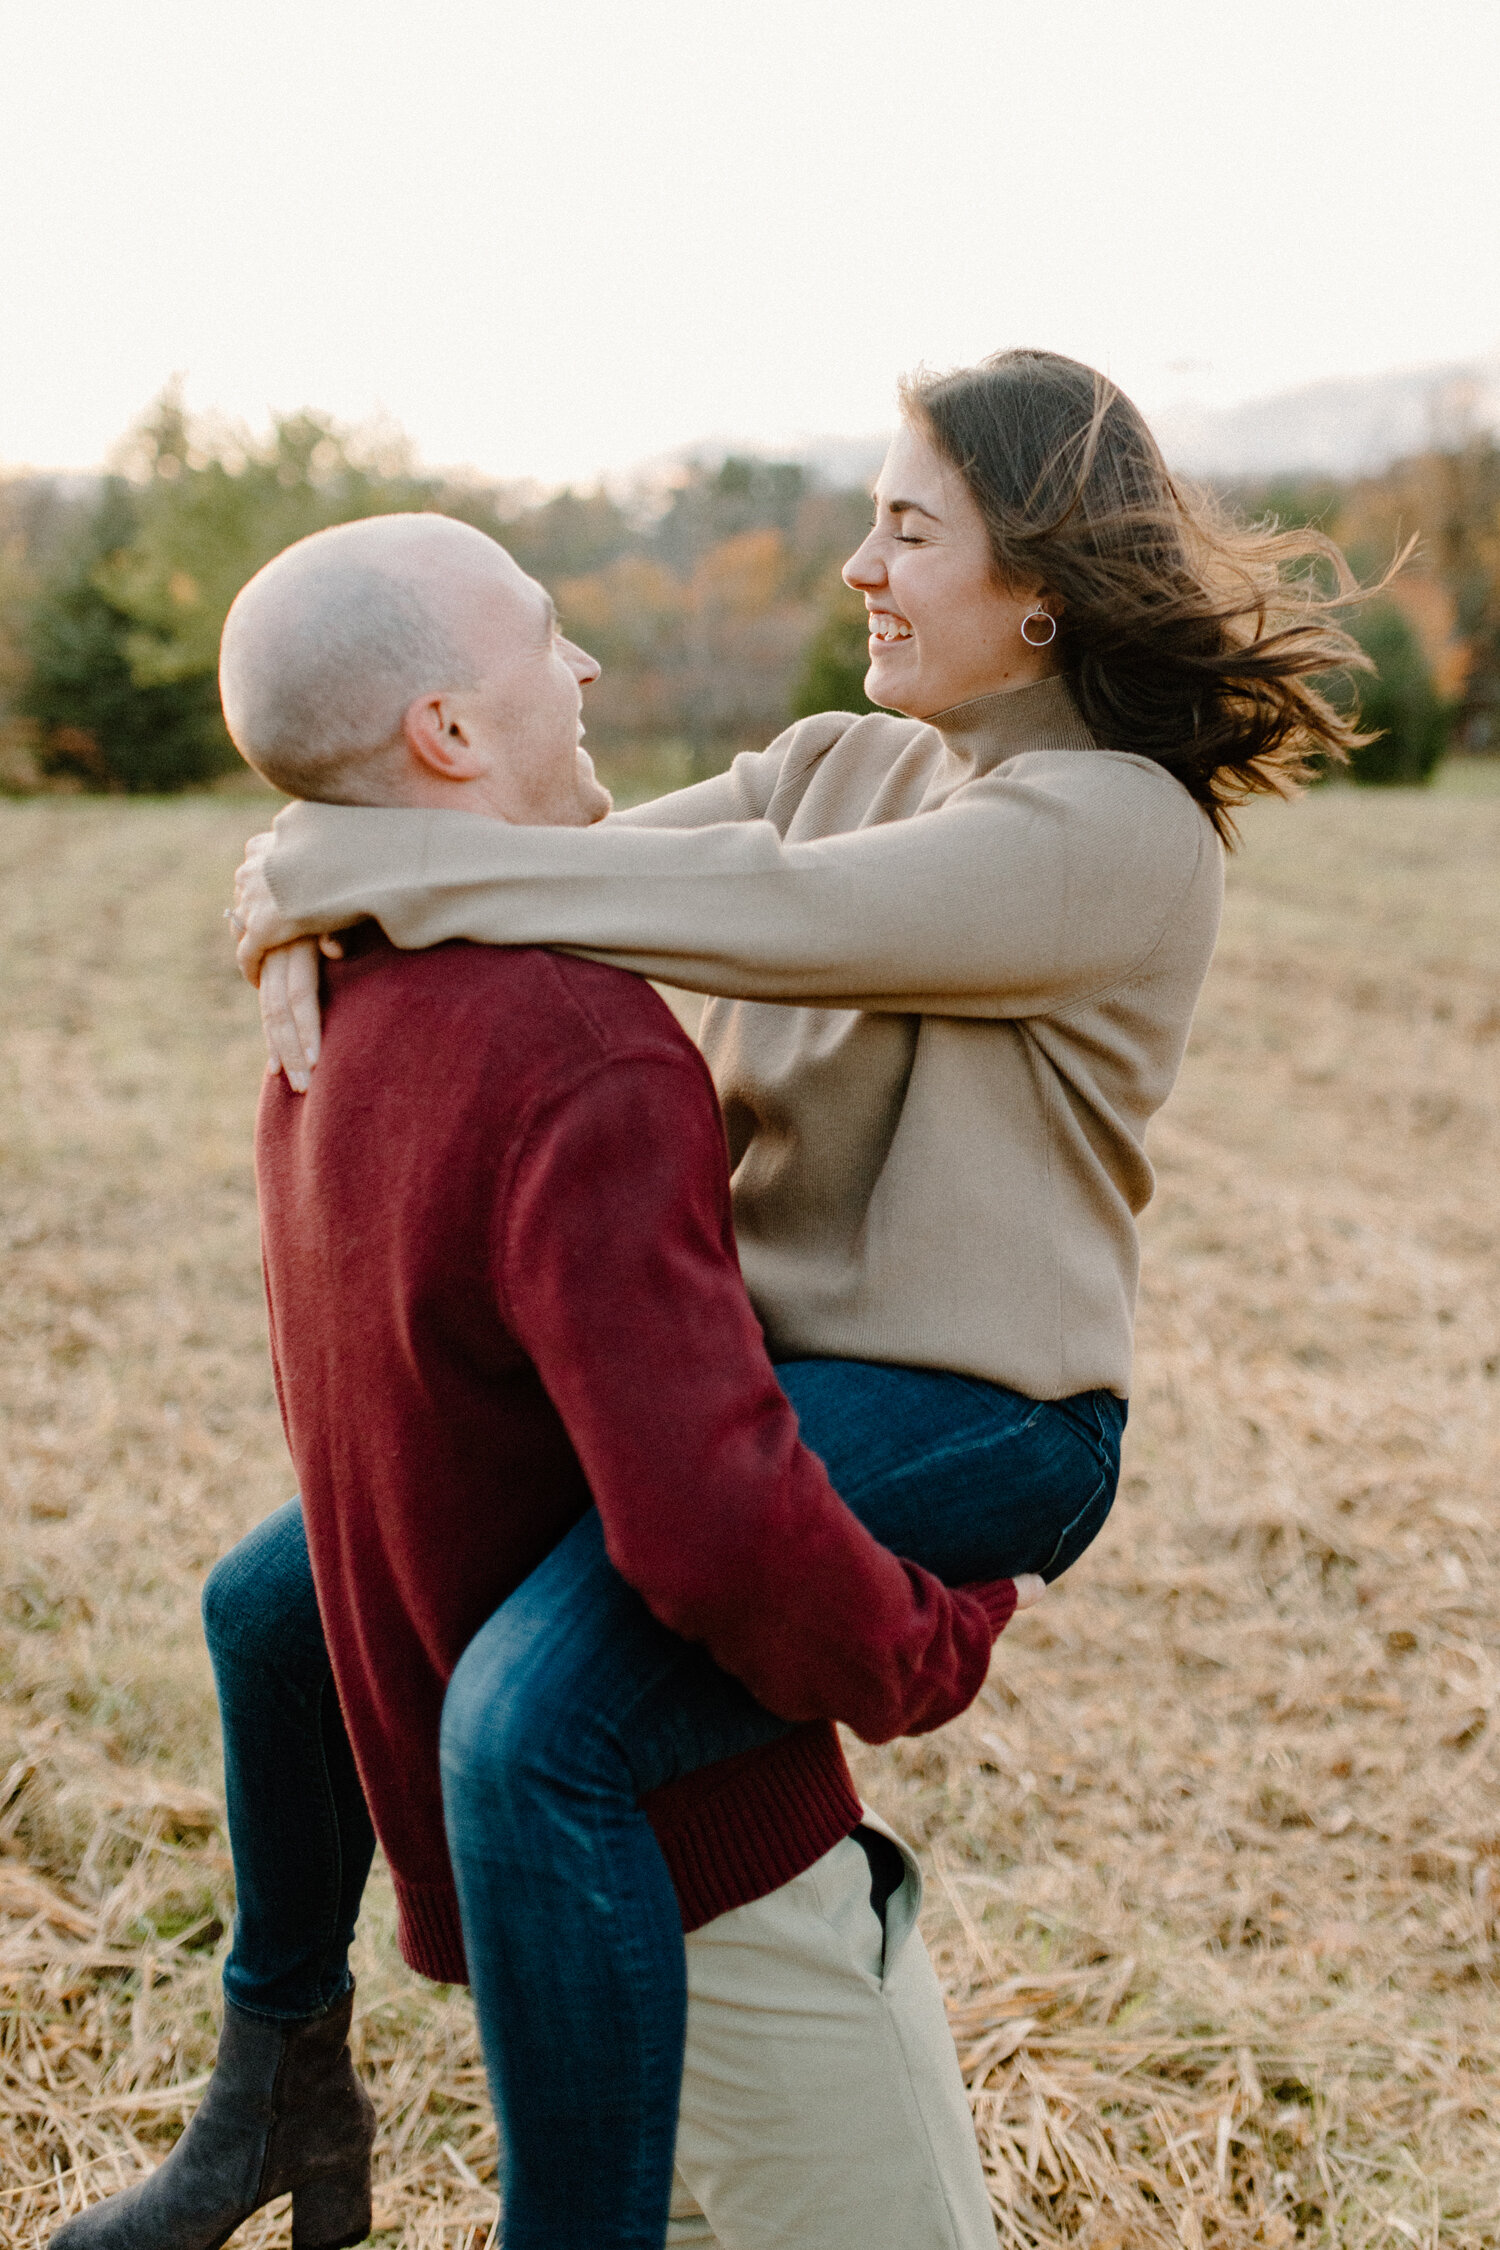  While posing for their engagement session in Ontario, Canada, this soon-to-be bride wraps her arms and legs around her fiance and laughs playfully for photos with Chelsea Mason Photography. red camel and denim colored engagement outfit ottawa canada